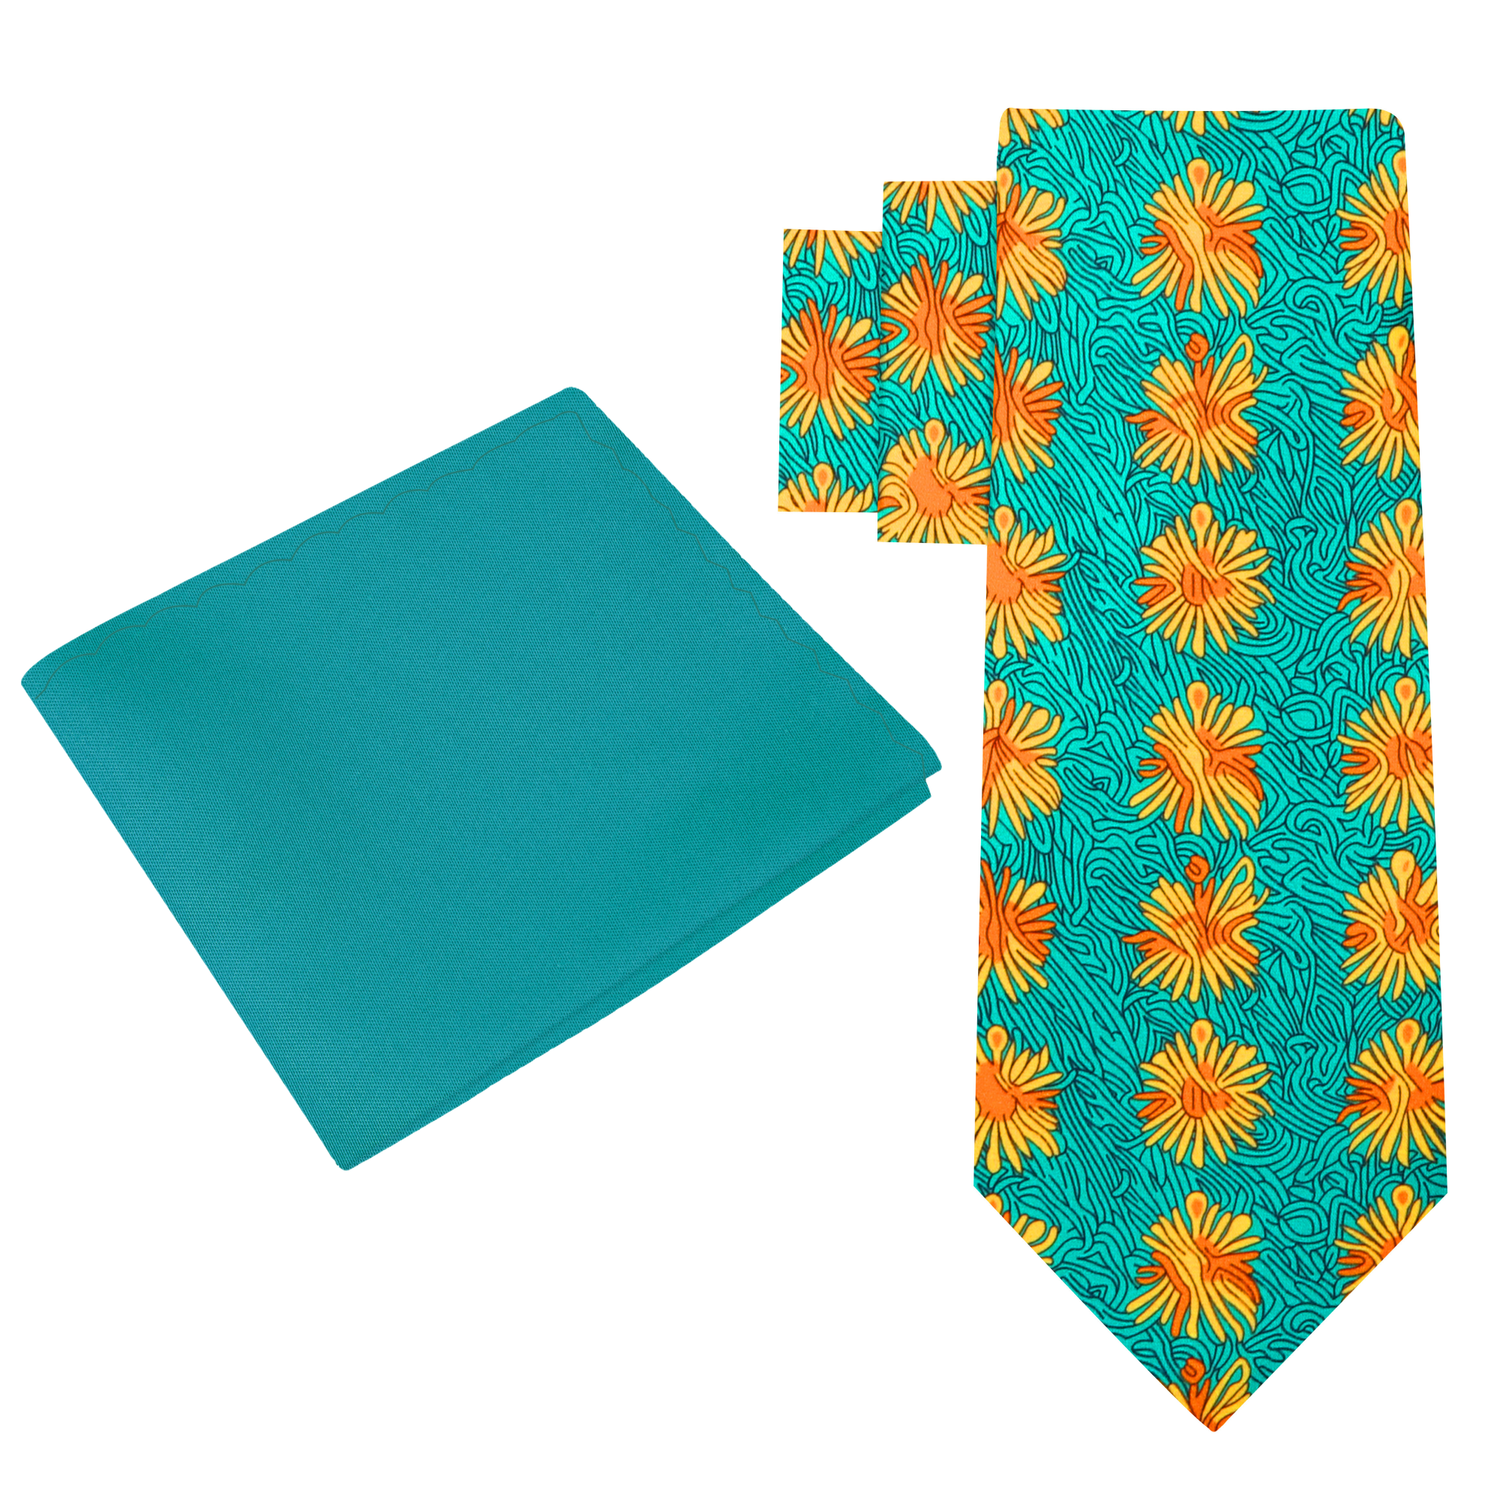 Alt View: Green, Orange Abstract Necktie and Square